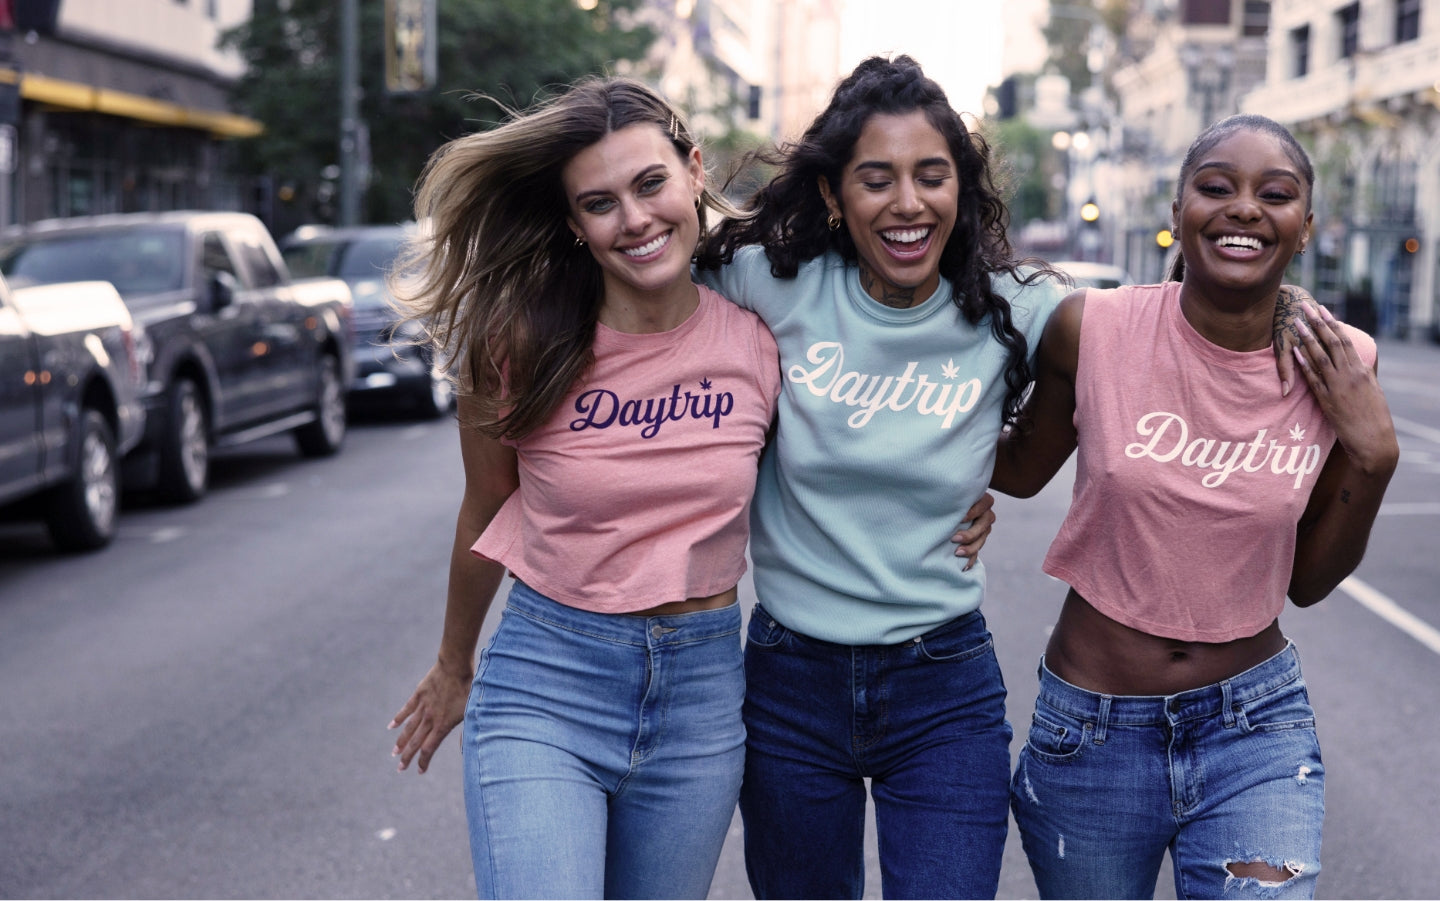 Three women smiling as they walk down a busy street in downtown los angeles in Daytrip shirts